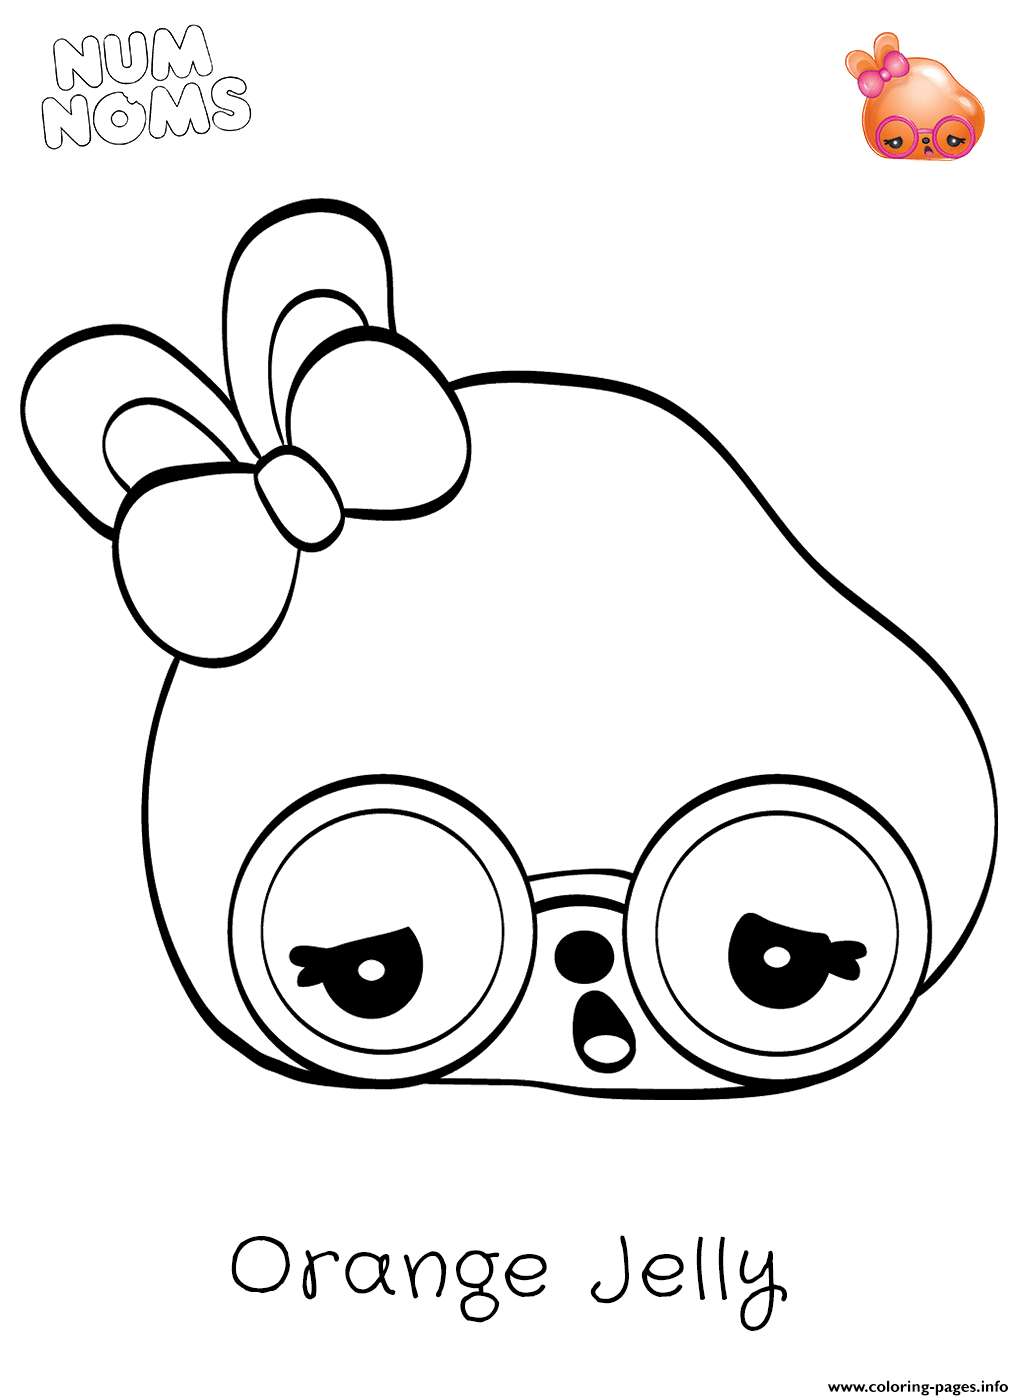 Download Cute Num Noms Character Orange Jelly Coloring Pages Printable